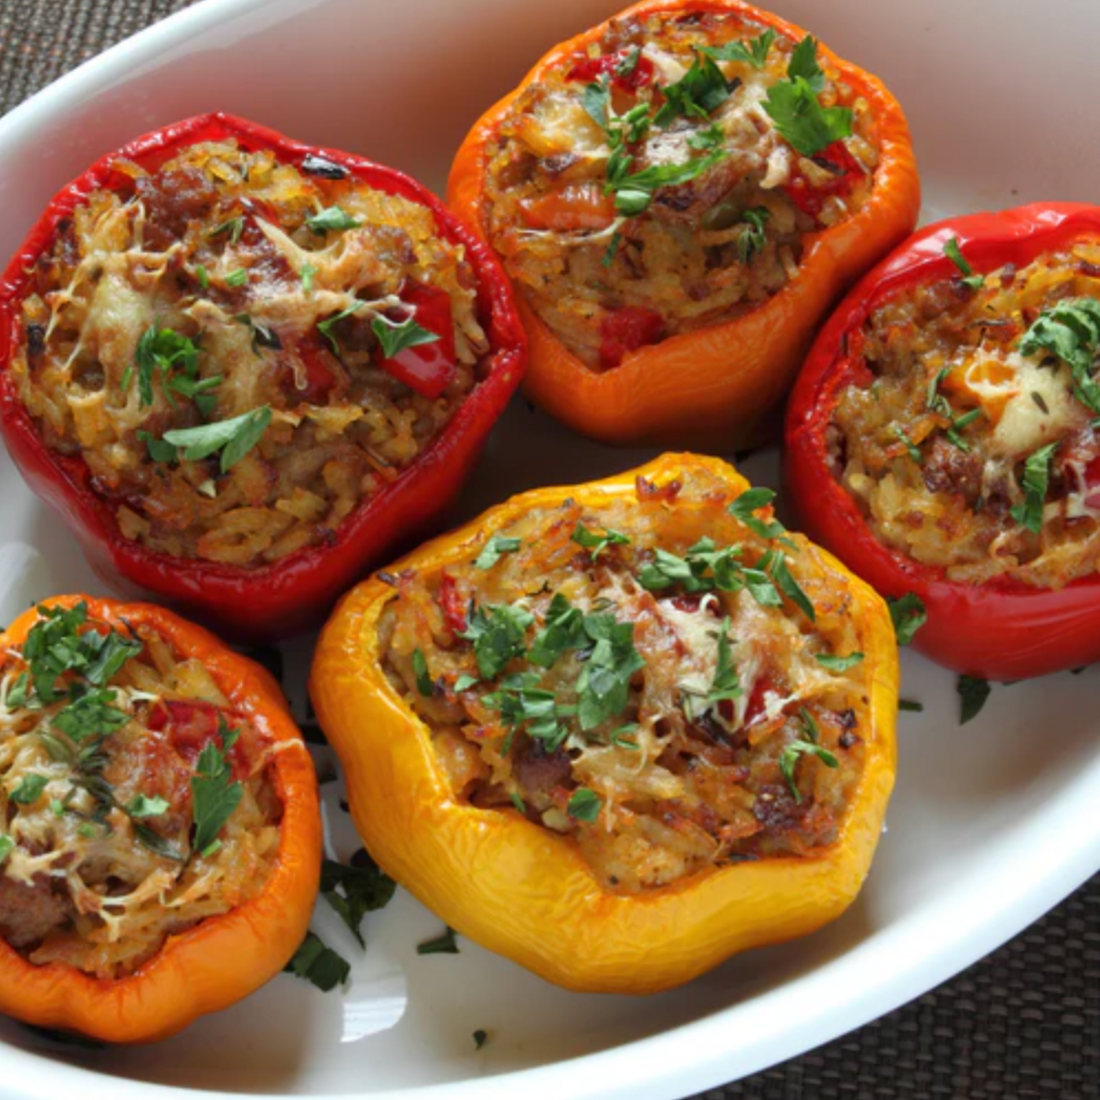 5 stuffed peppers in a dish